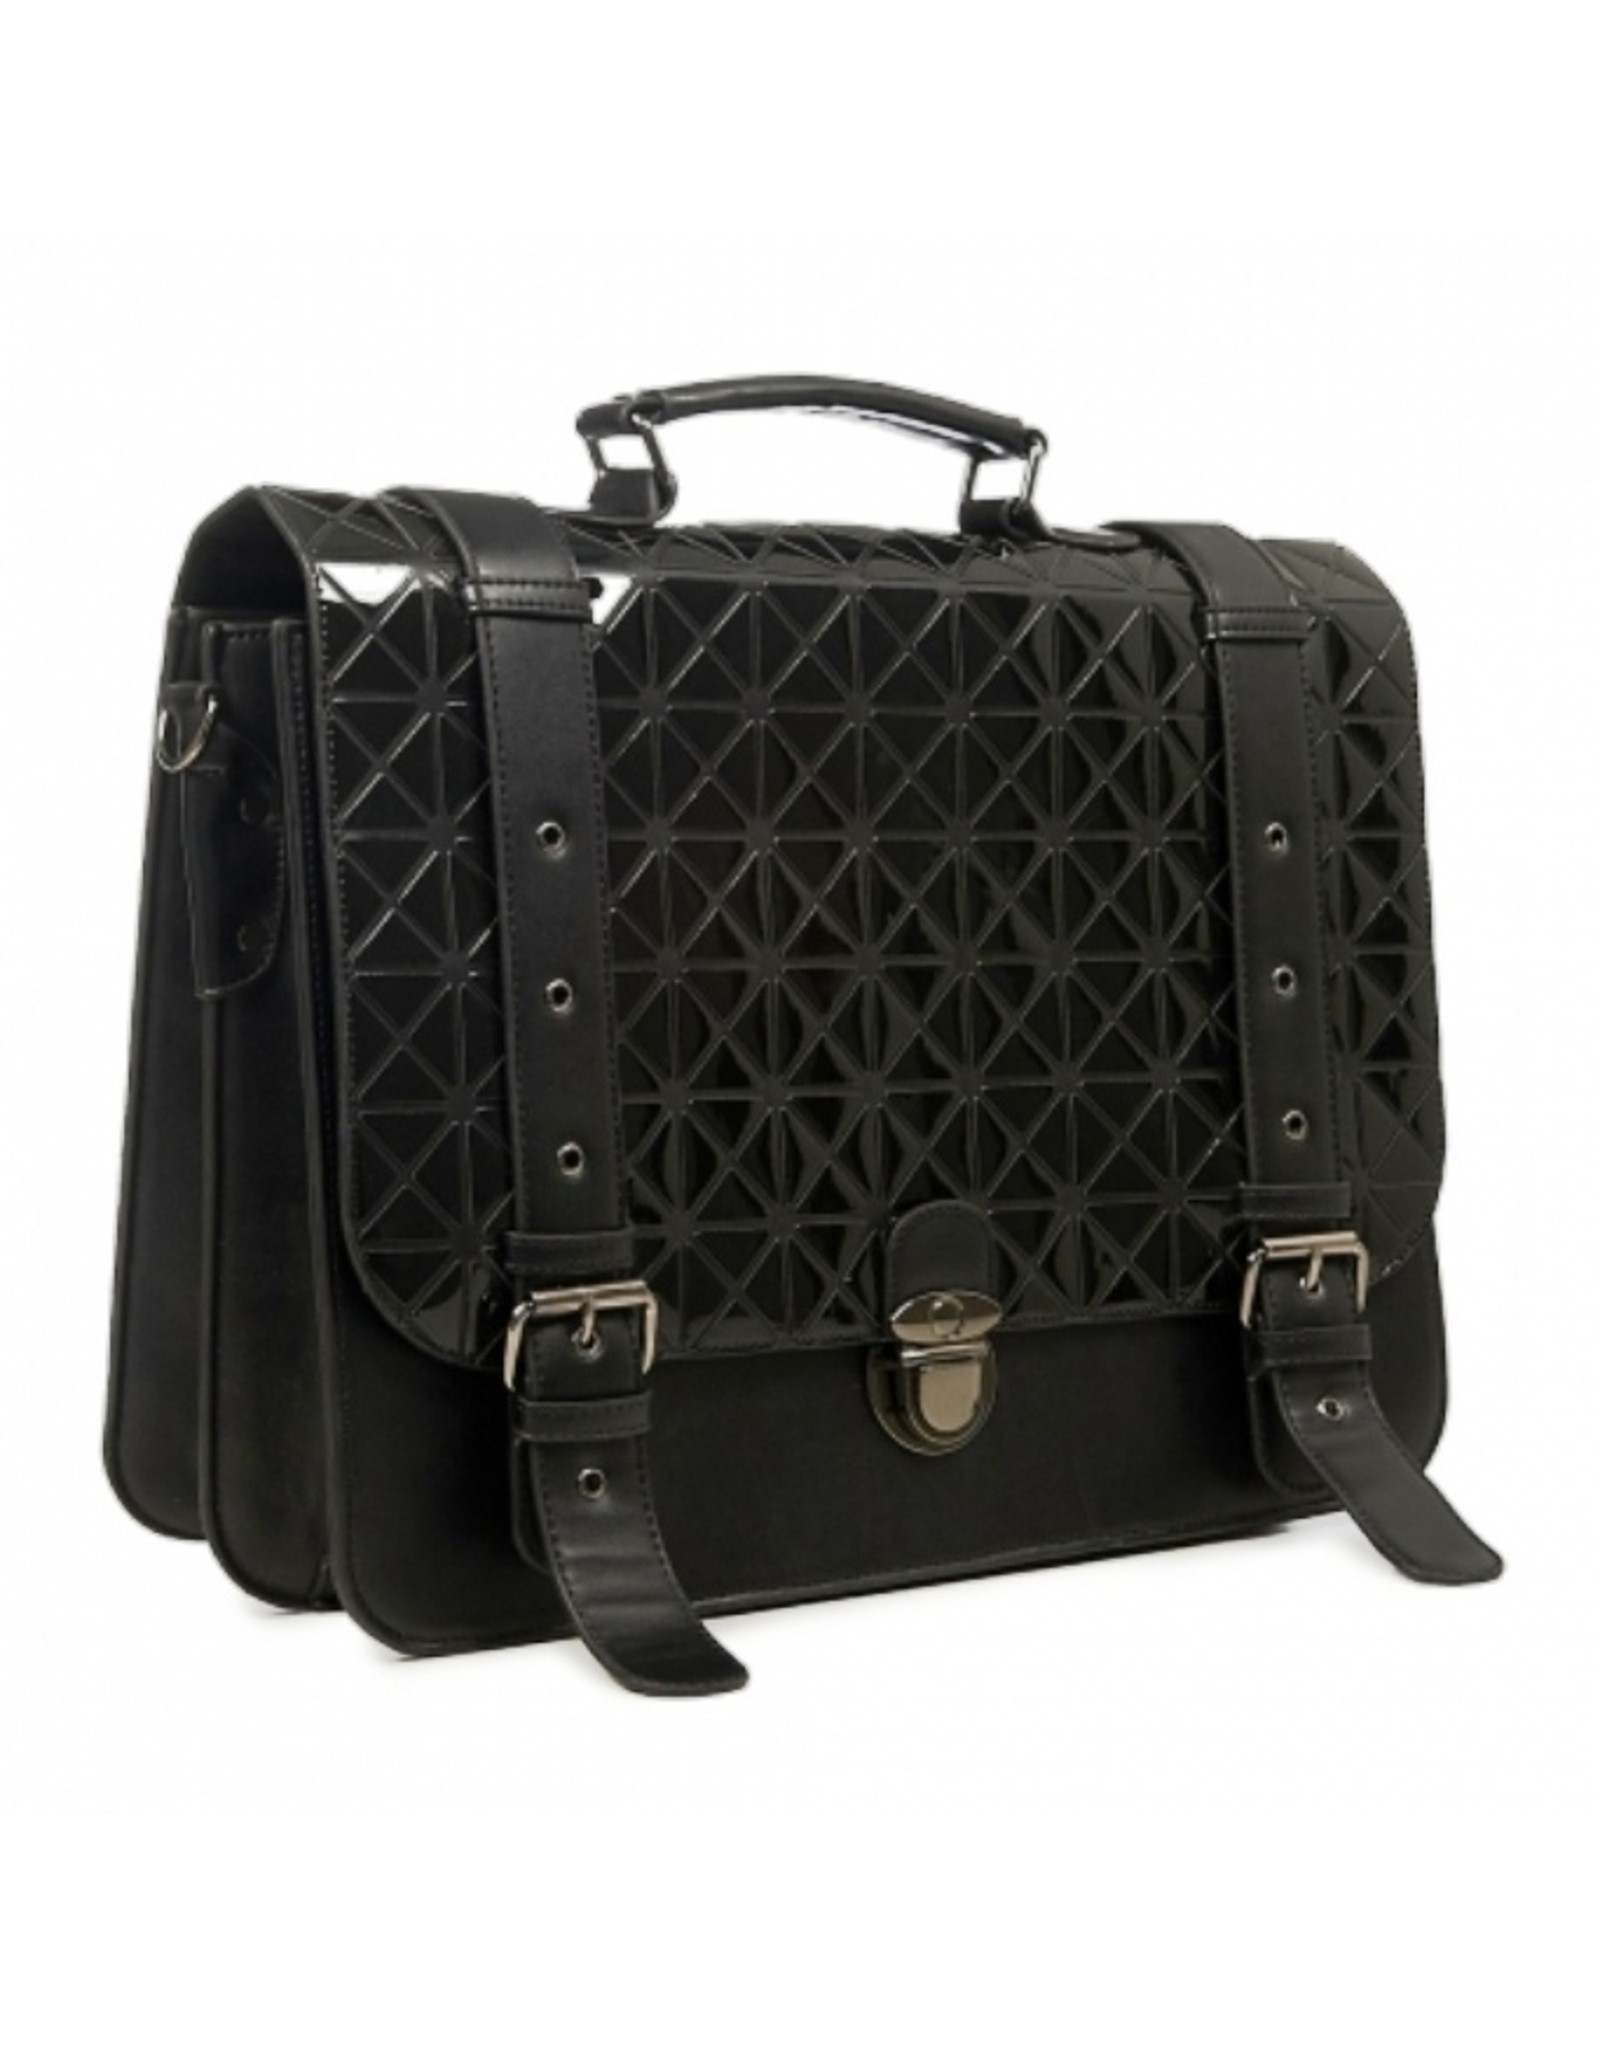 Banned Retro bags and Vintage bags - Banned  Prism Messengerbag black